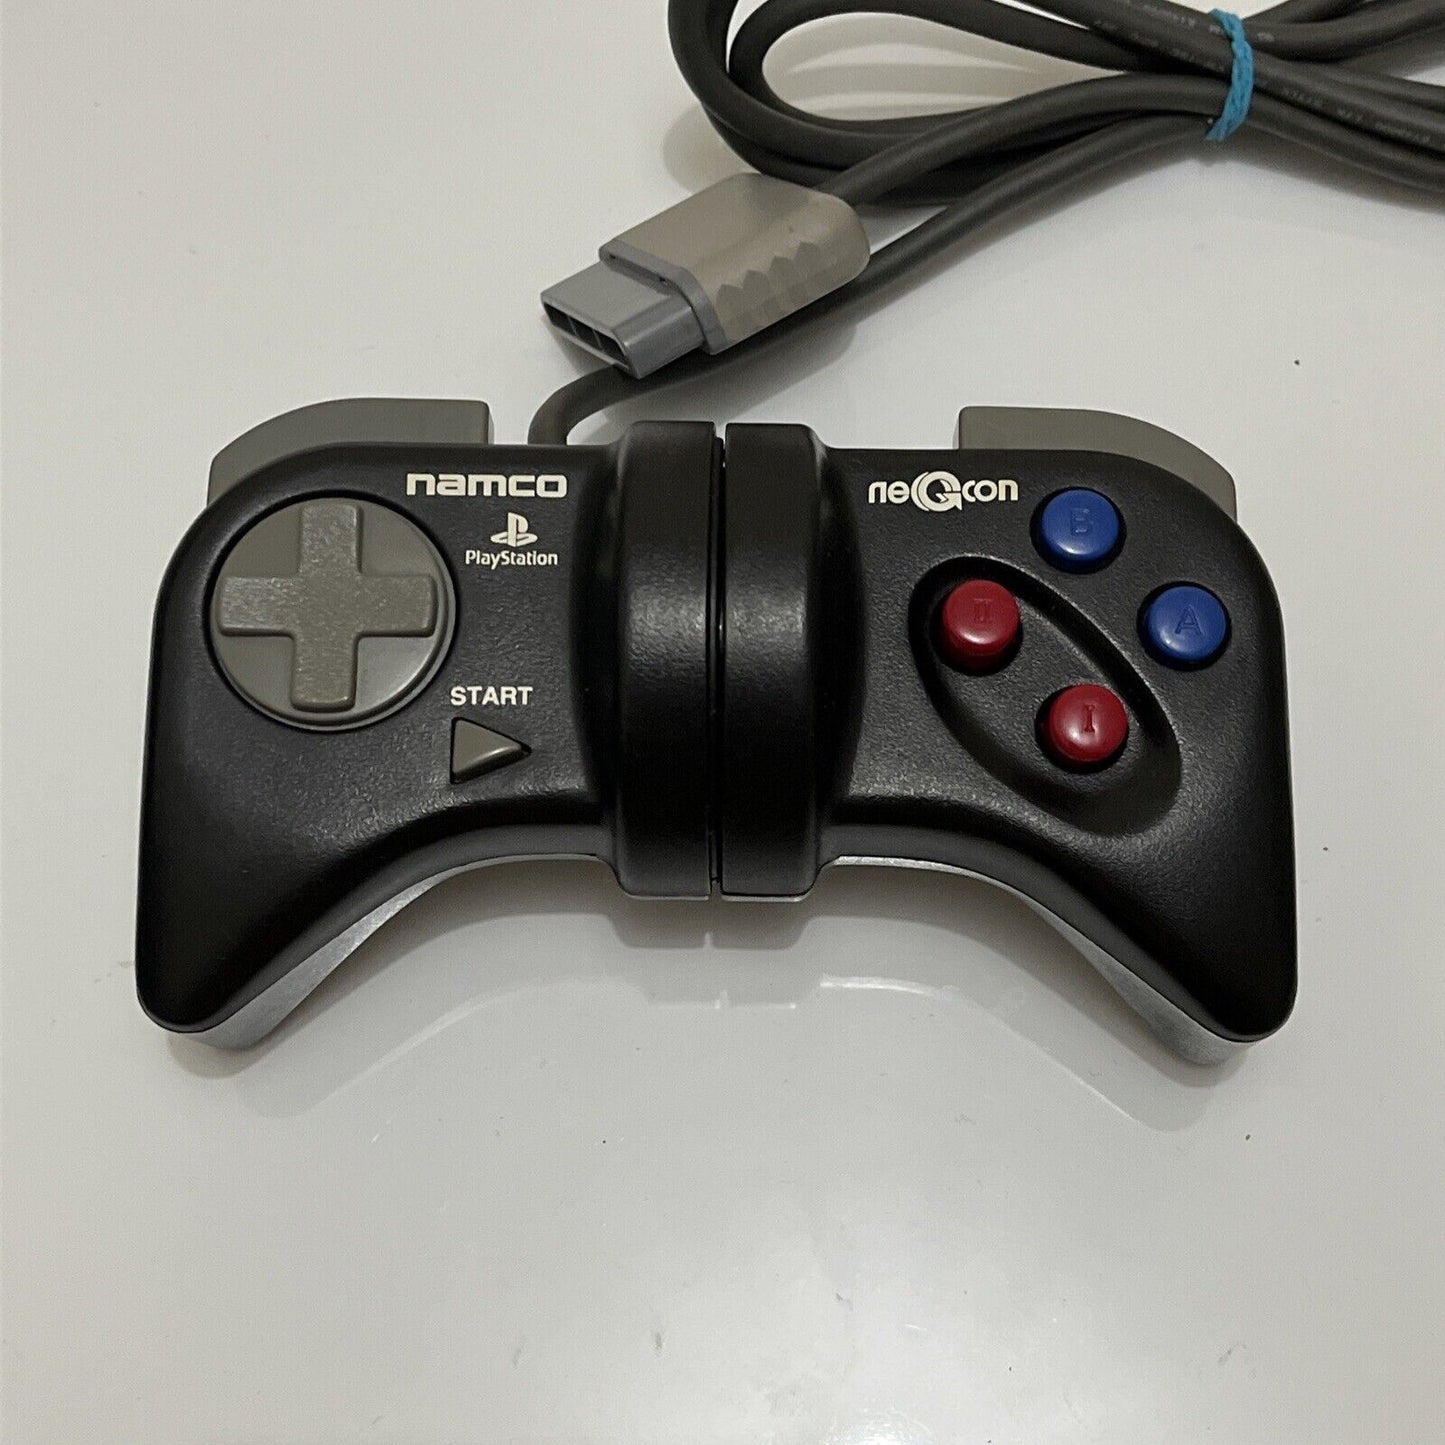 Sony Playstation 1 PS1 NAMCO Negcon Controller Black